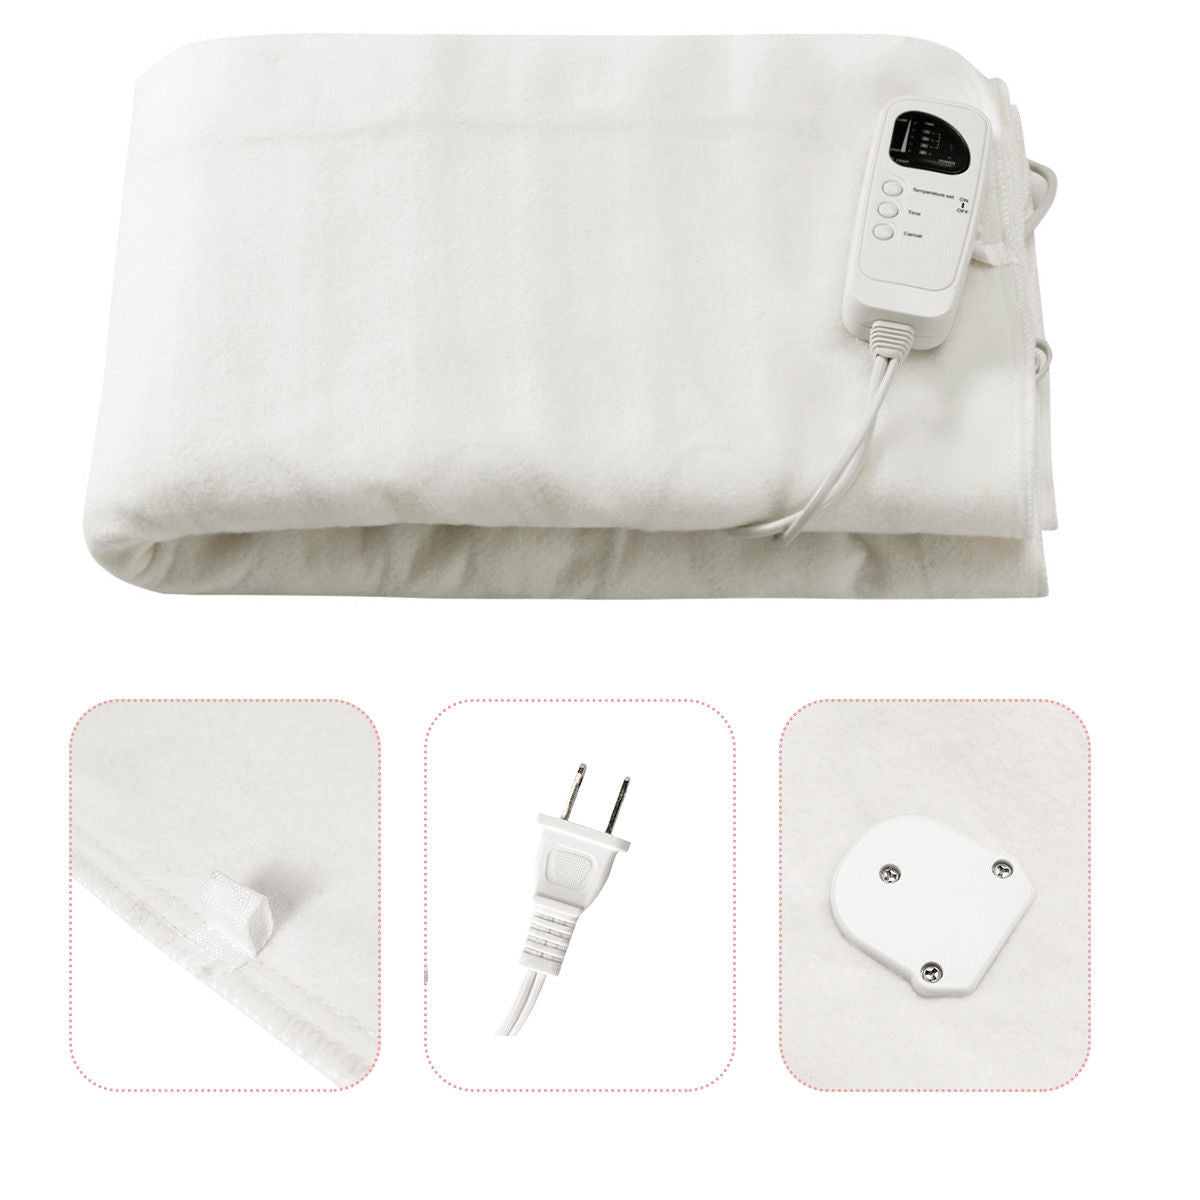 Electric Heated Blanket 5 Temperature Modes 8H Timer UL - Gallery Canada